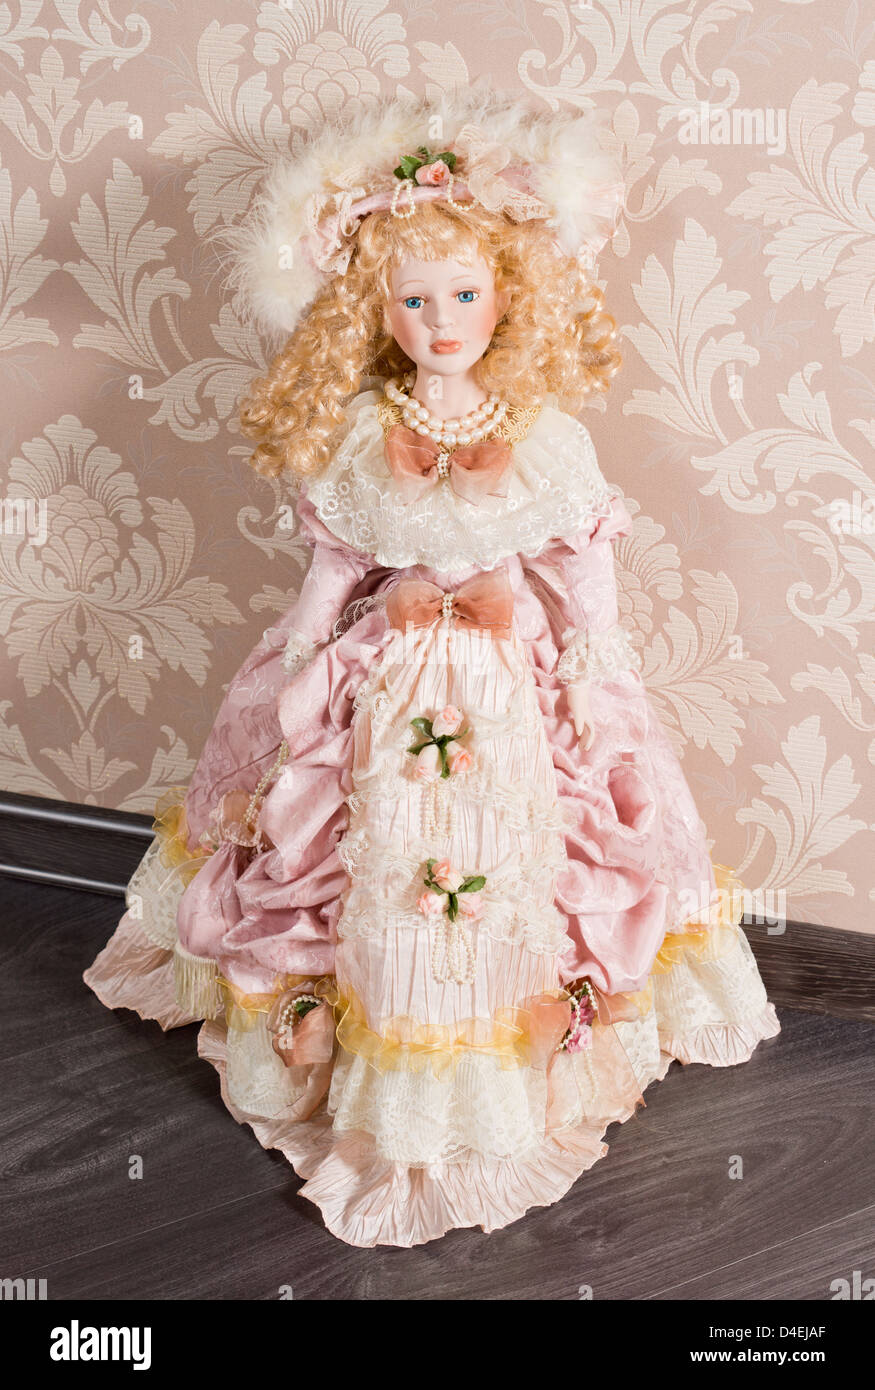 Pretty delicate antique doll with long blonde ringlets dressed in a beautiful pink nineteenth century gown and accessories Stock Photo